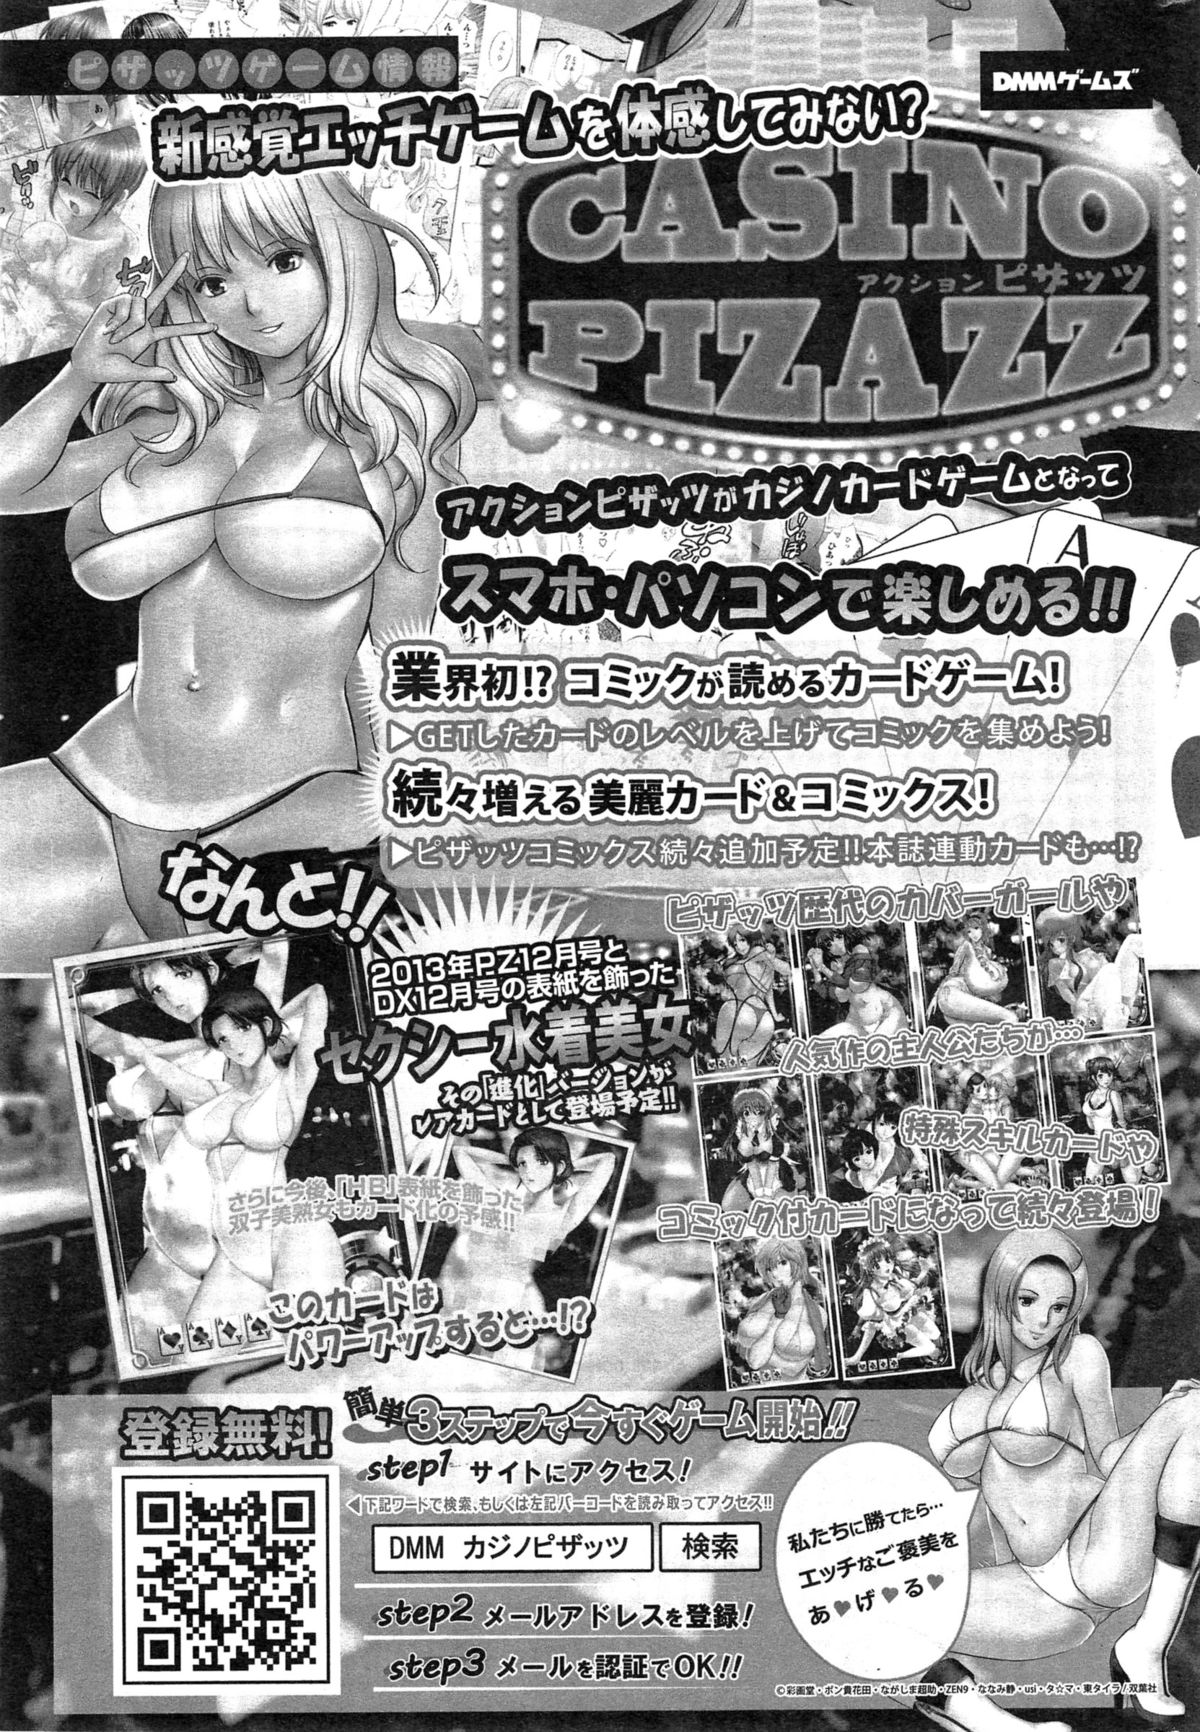 Action Pizazz DX 2015-03 page 43 full